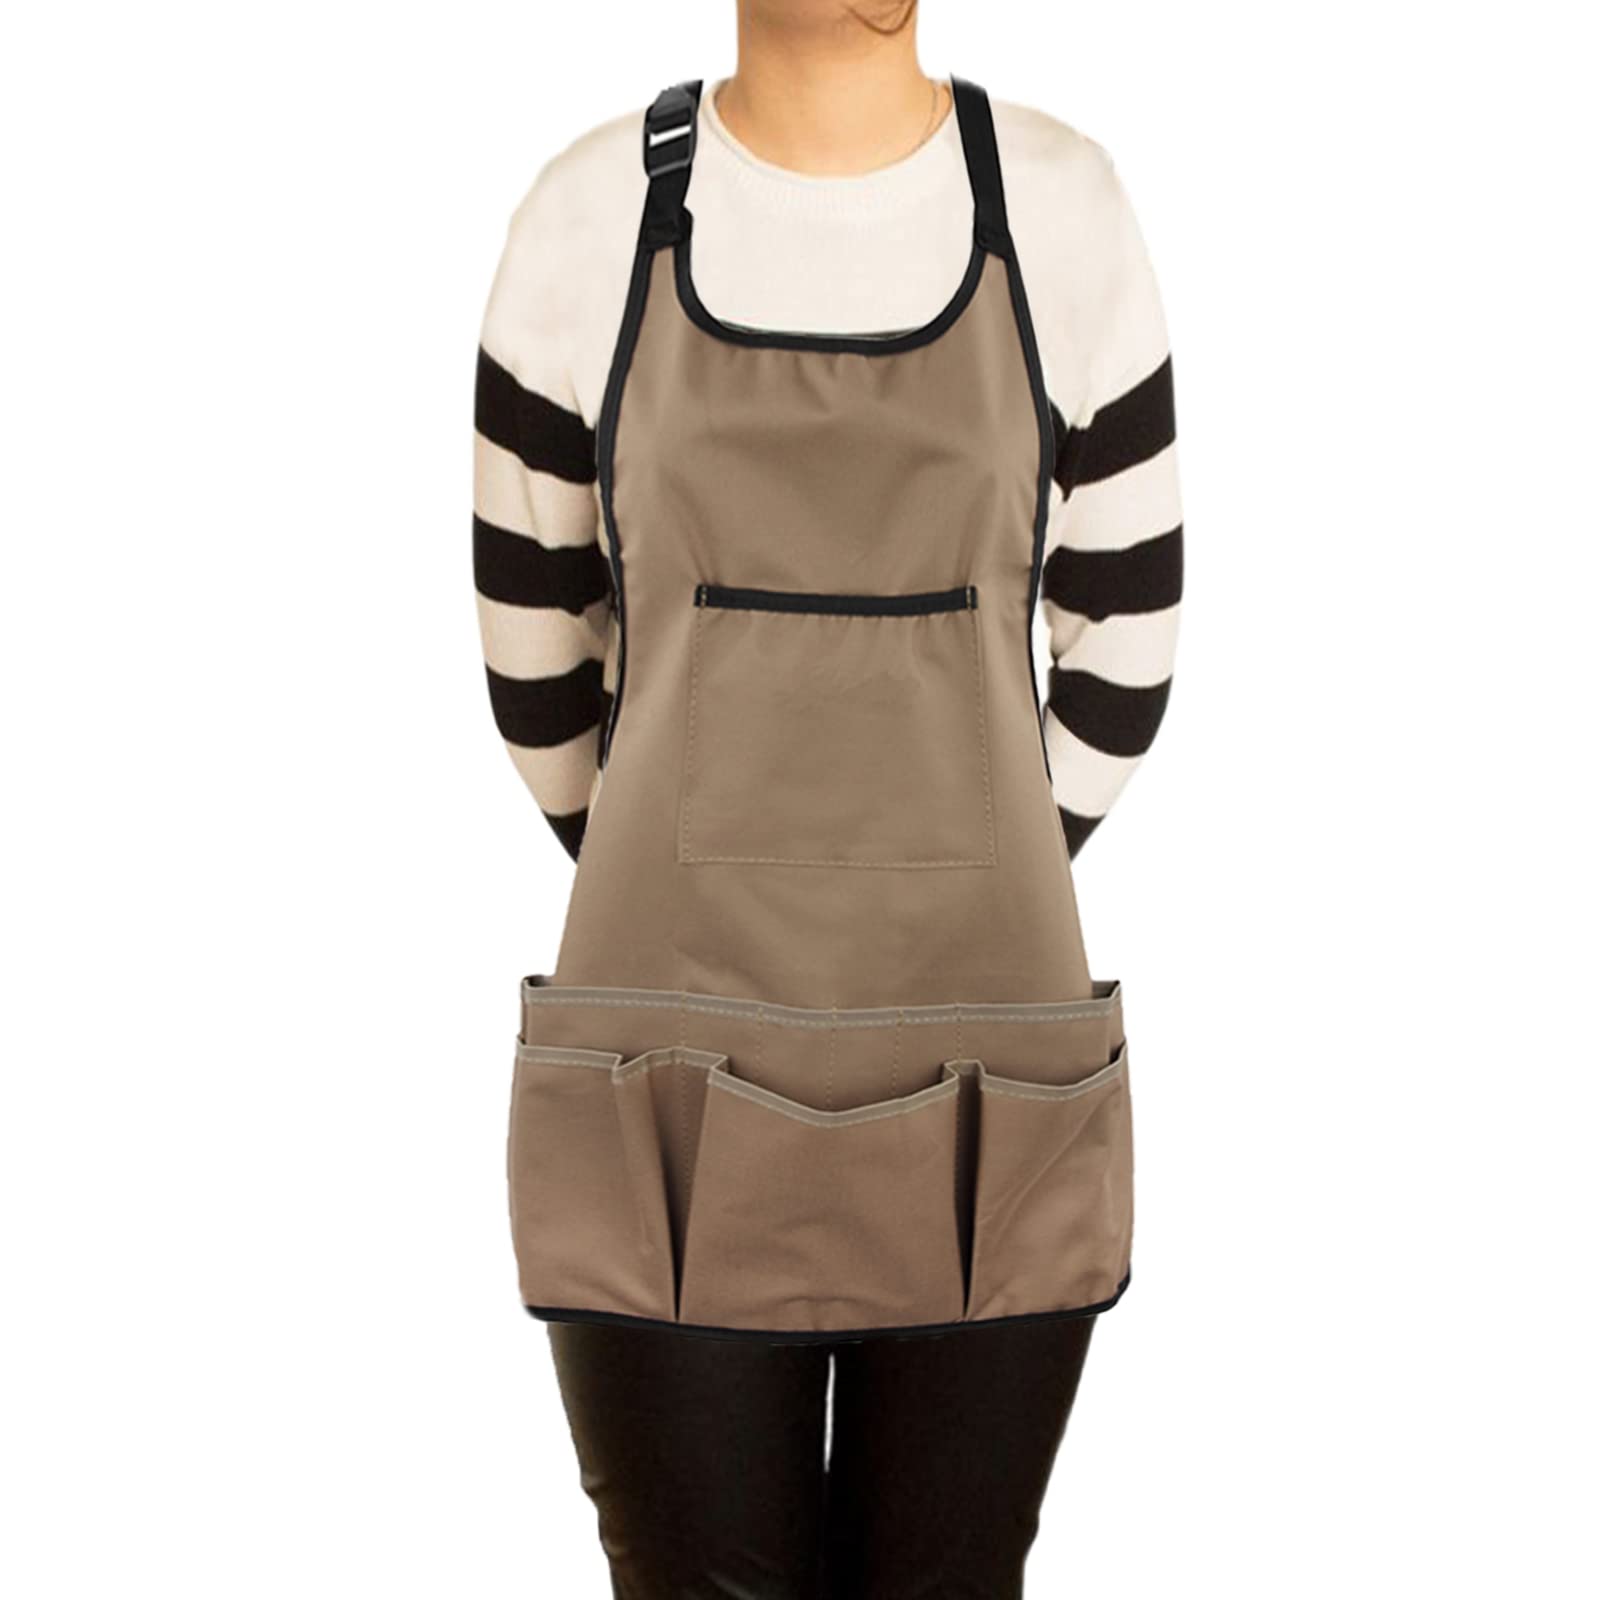 PATILWON Gardening Apron for Women with Pockets